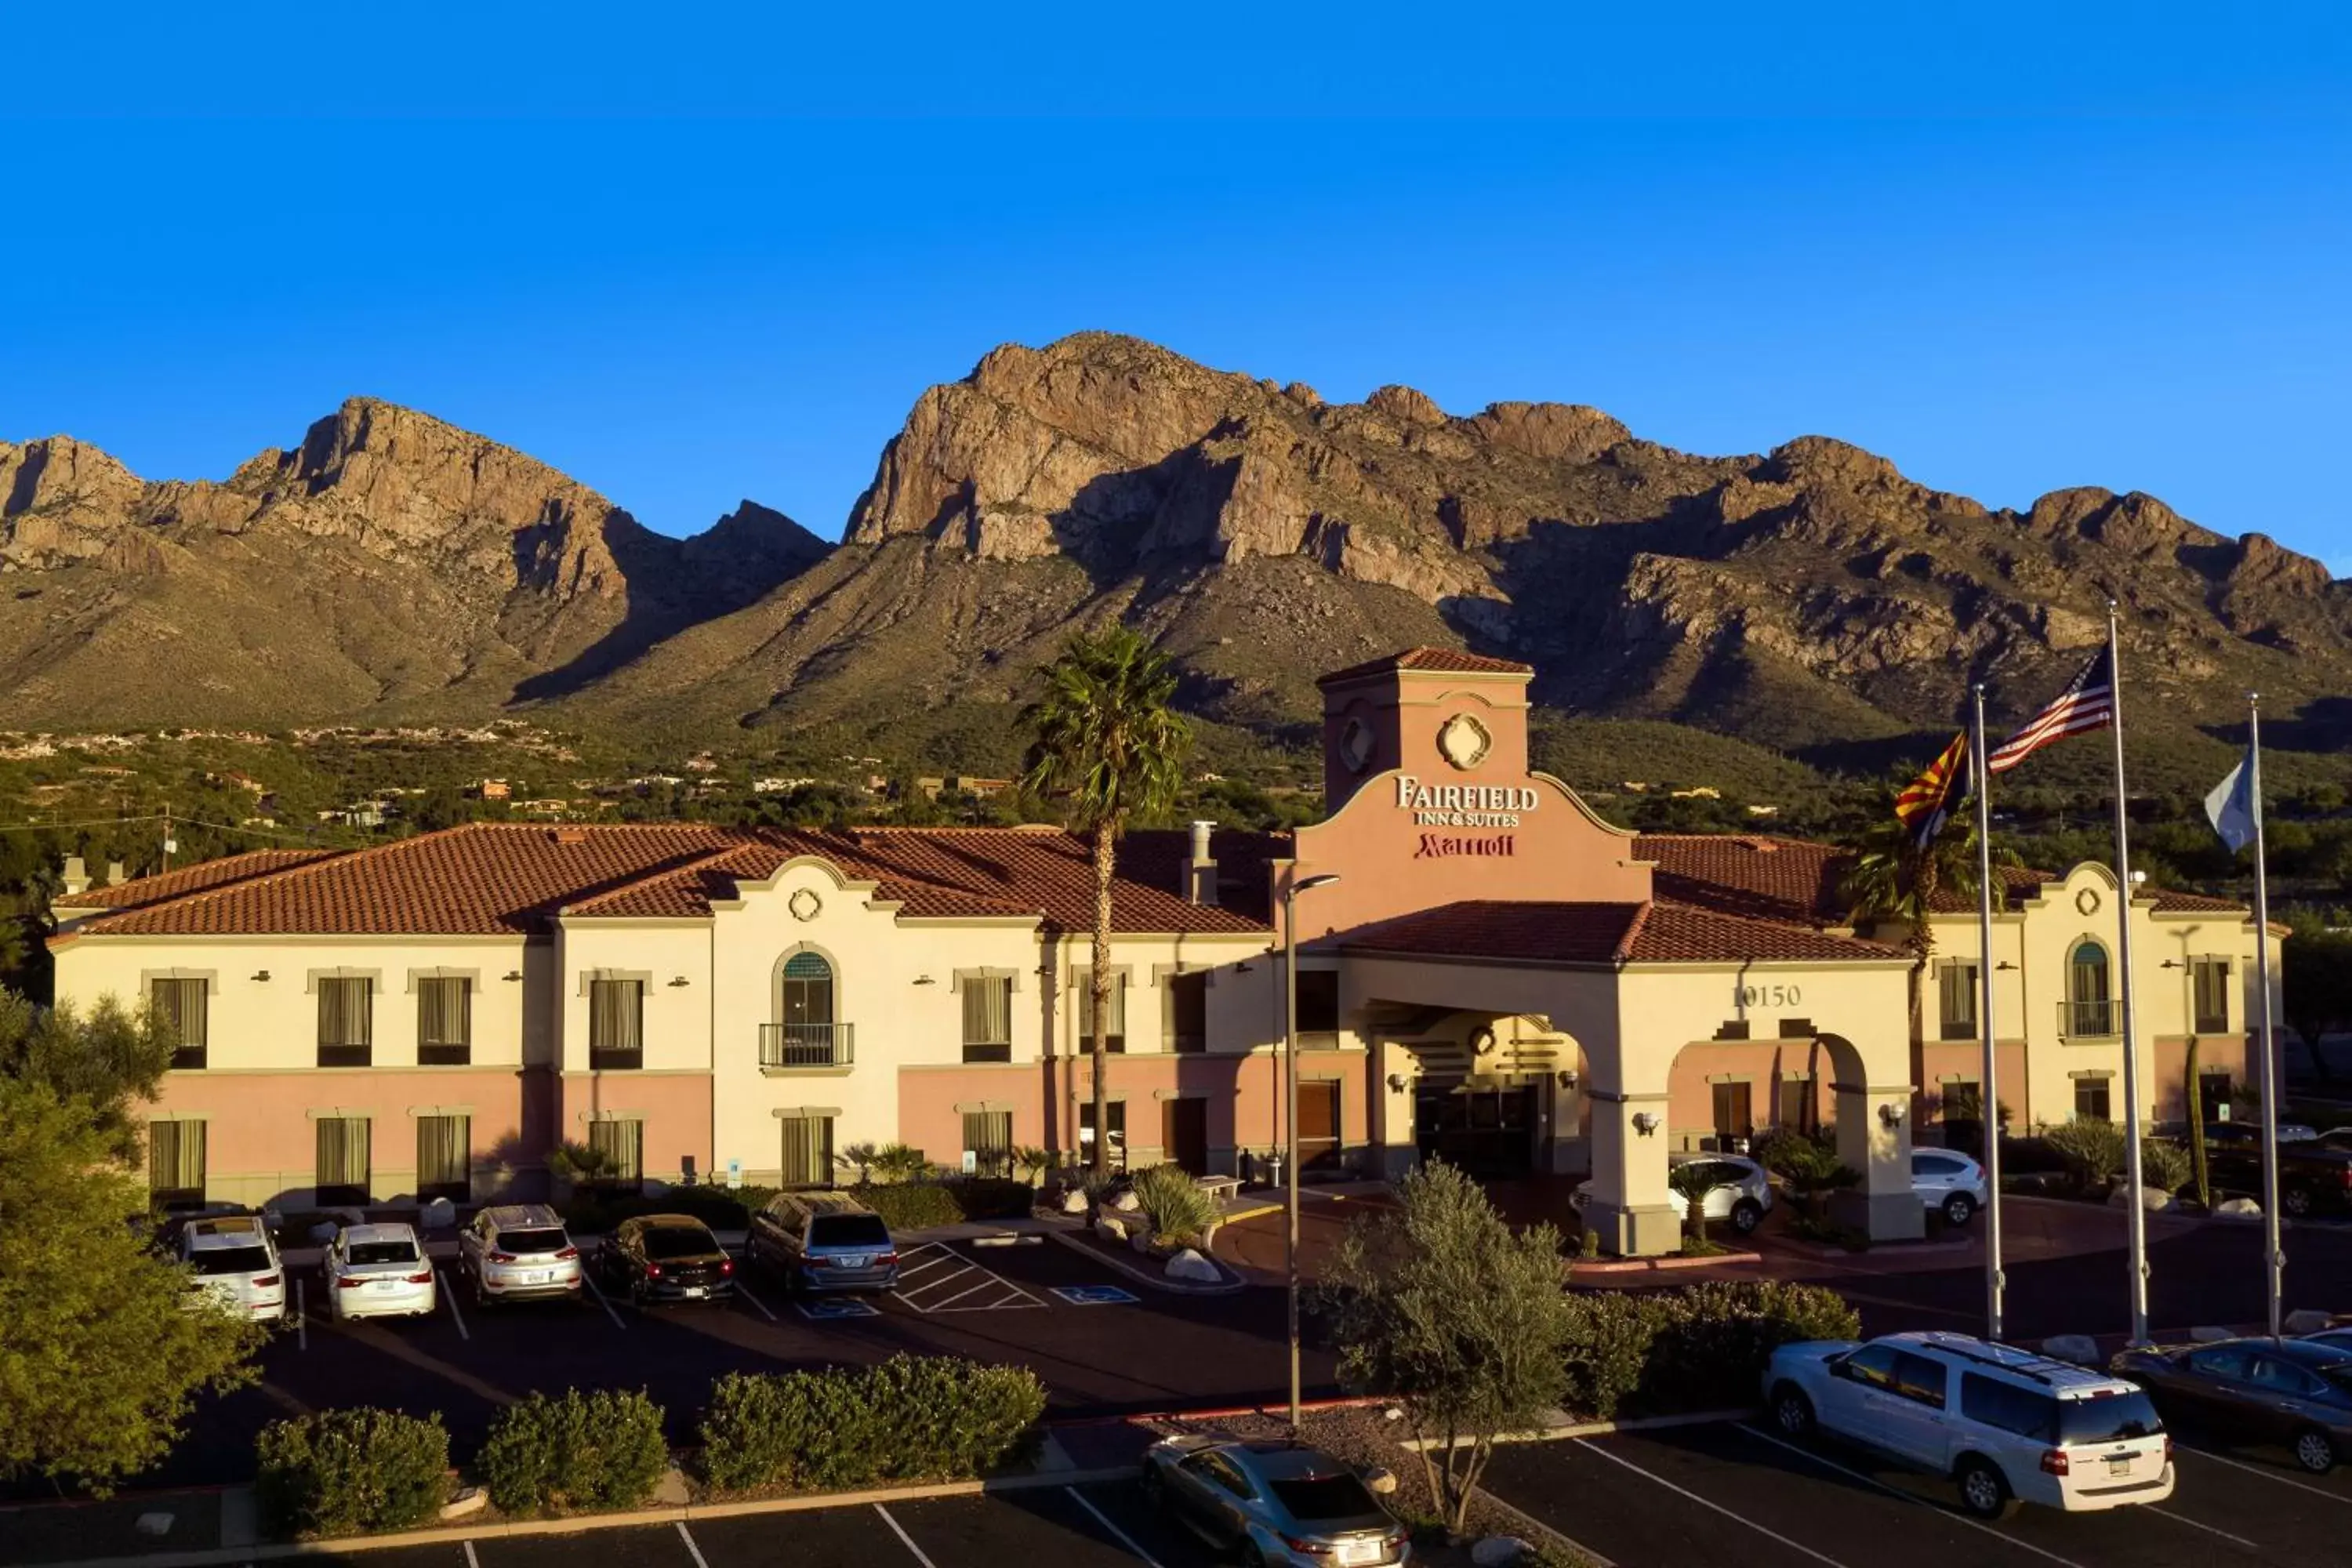 Property building in Fairfield Inn & Suites Tucson North/Oro Valley